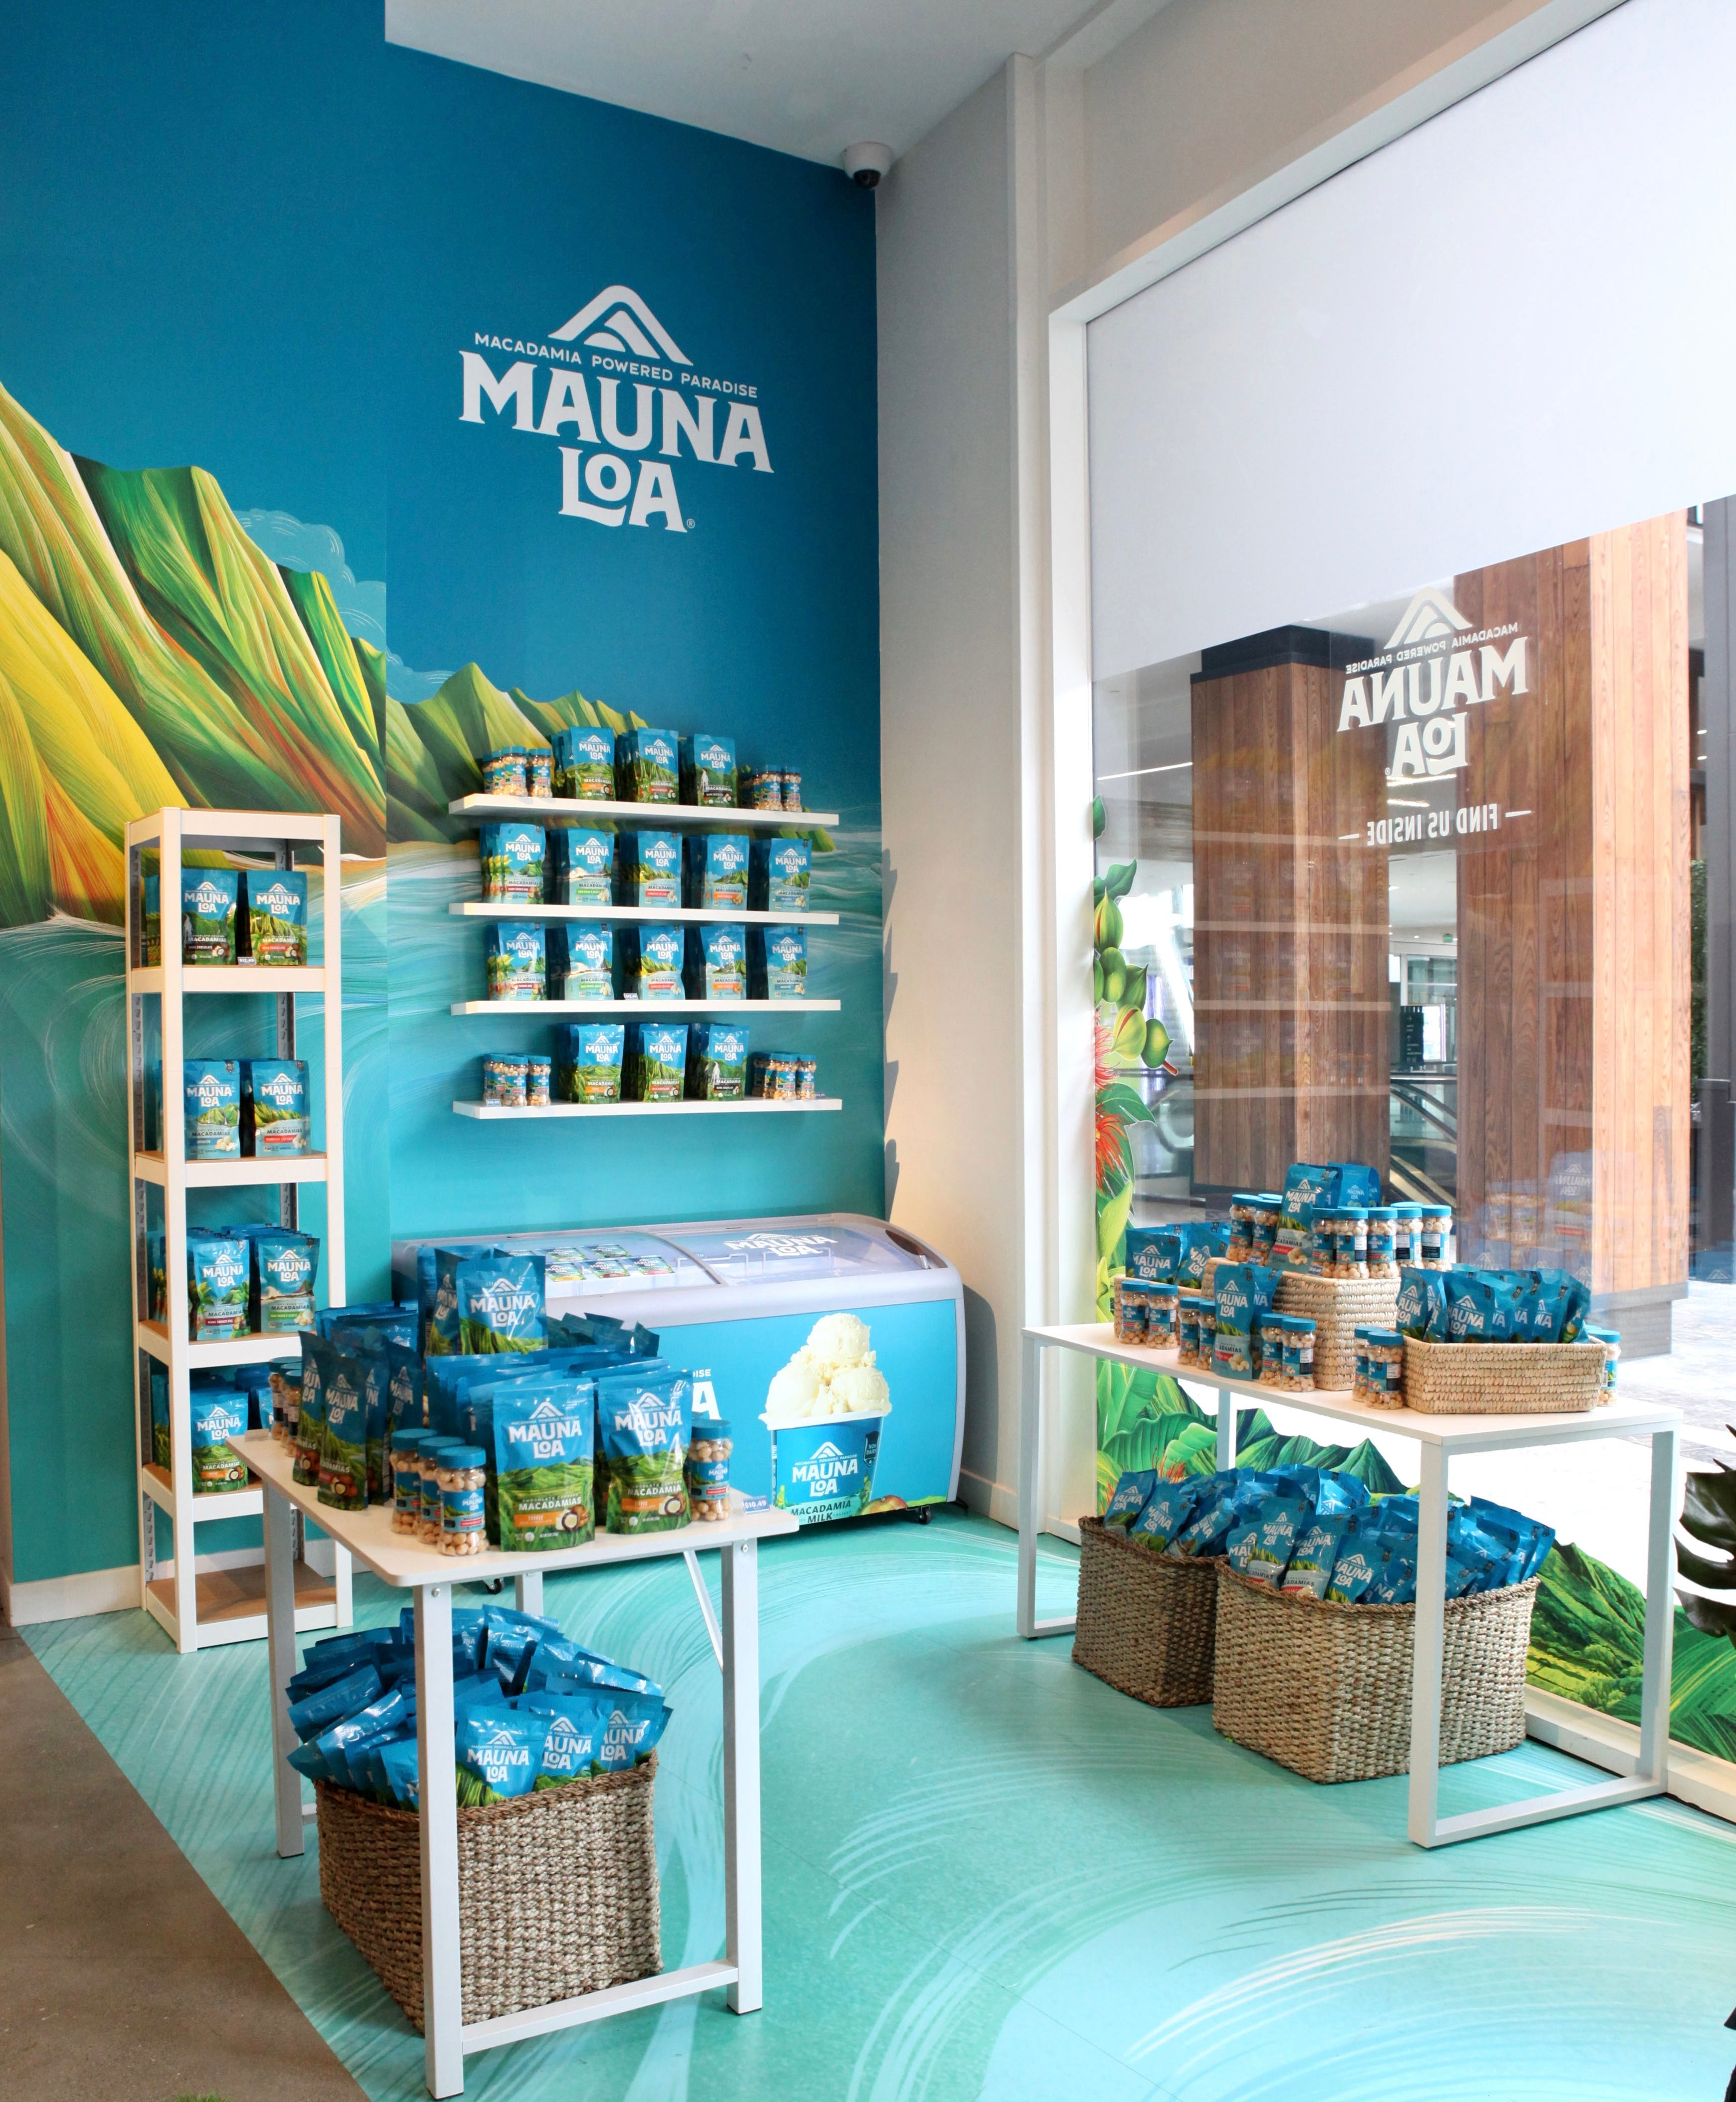 Mauna Loa® Joins Fellow Hawai‘i Brand, Kahala, to Bring the Aloha Spirit to the Mainland with a Pop-Up Shop at Westfield Century City, Los Angeles, CA May 28th - July 27th